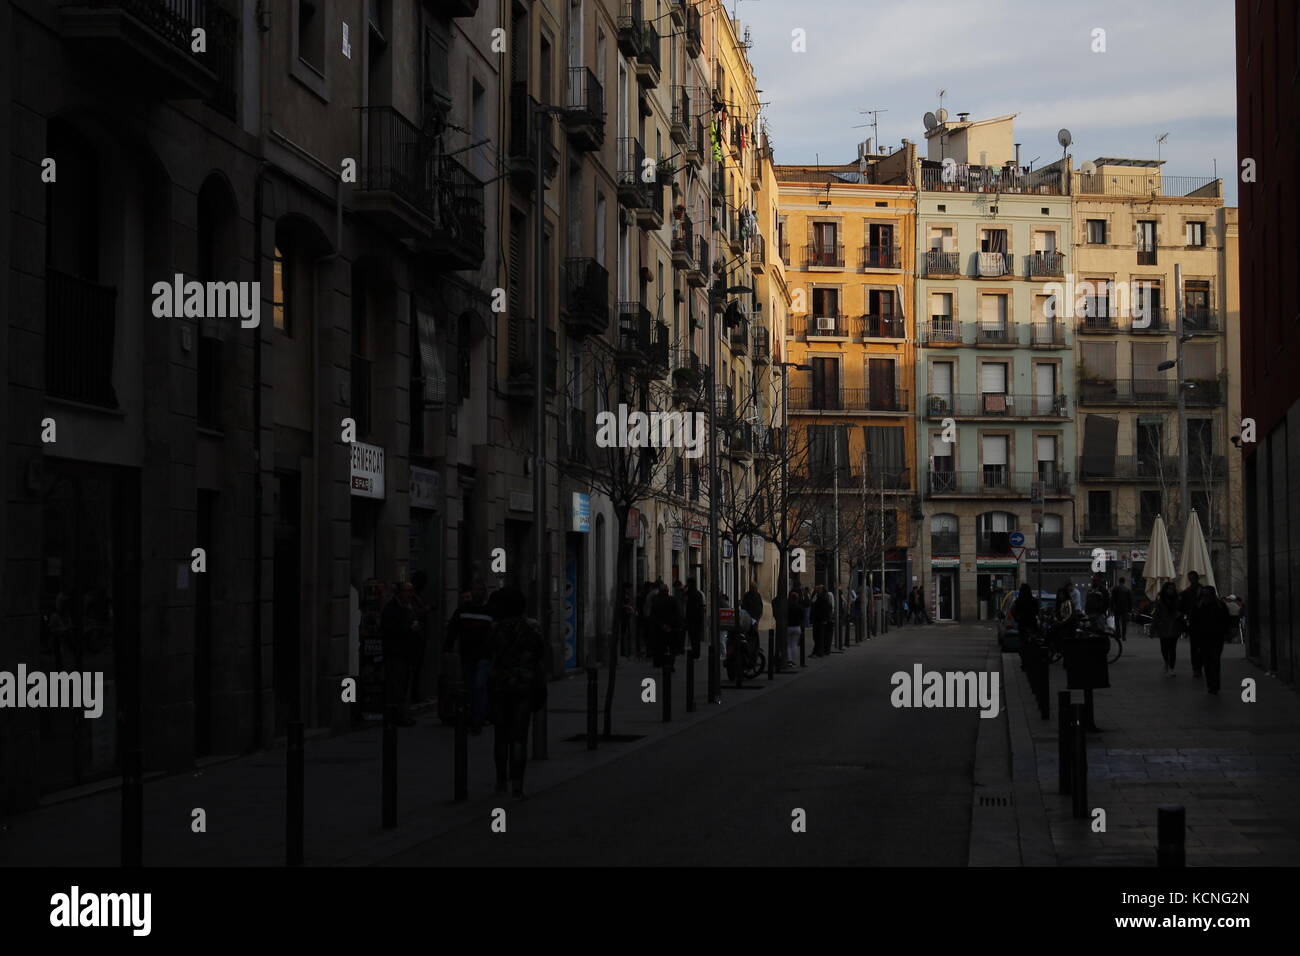 El Raval, Barcelona. One of the city's historic neighborhoods at sunset. Stock Photo